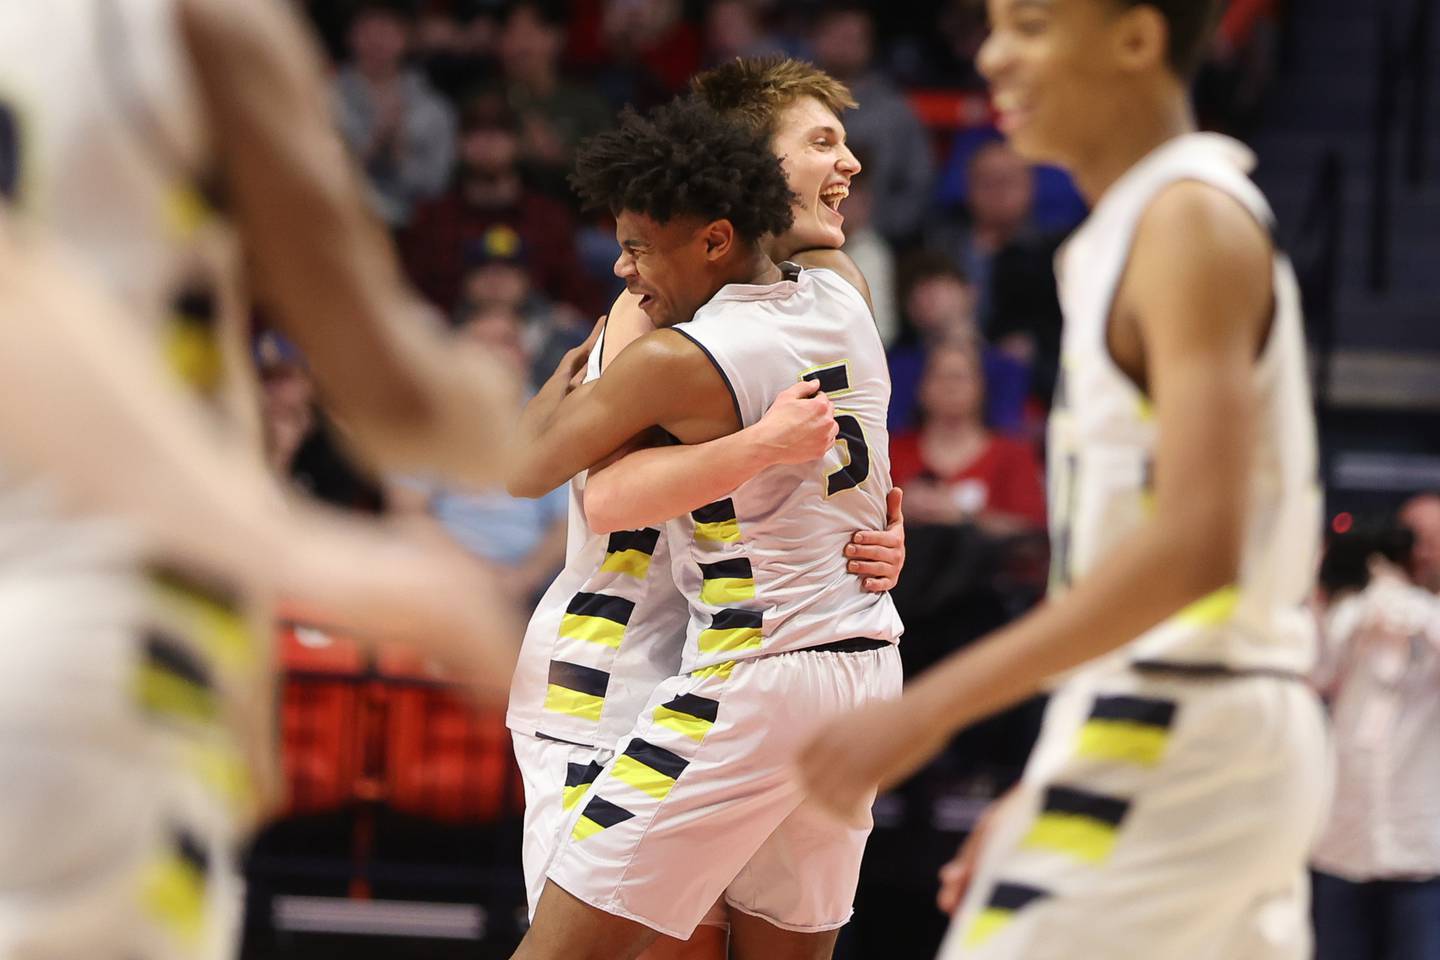 Yorkville Christian’s Jaden Schutt (2) and Tyler Burrows (5) embrace after their 54-41 win over Liberty in the Class 1A championship game at State Farm Center in Champaign. Friday, Mar. 11, 2022, in Champaign.